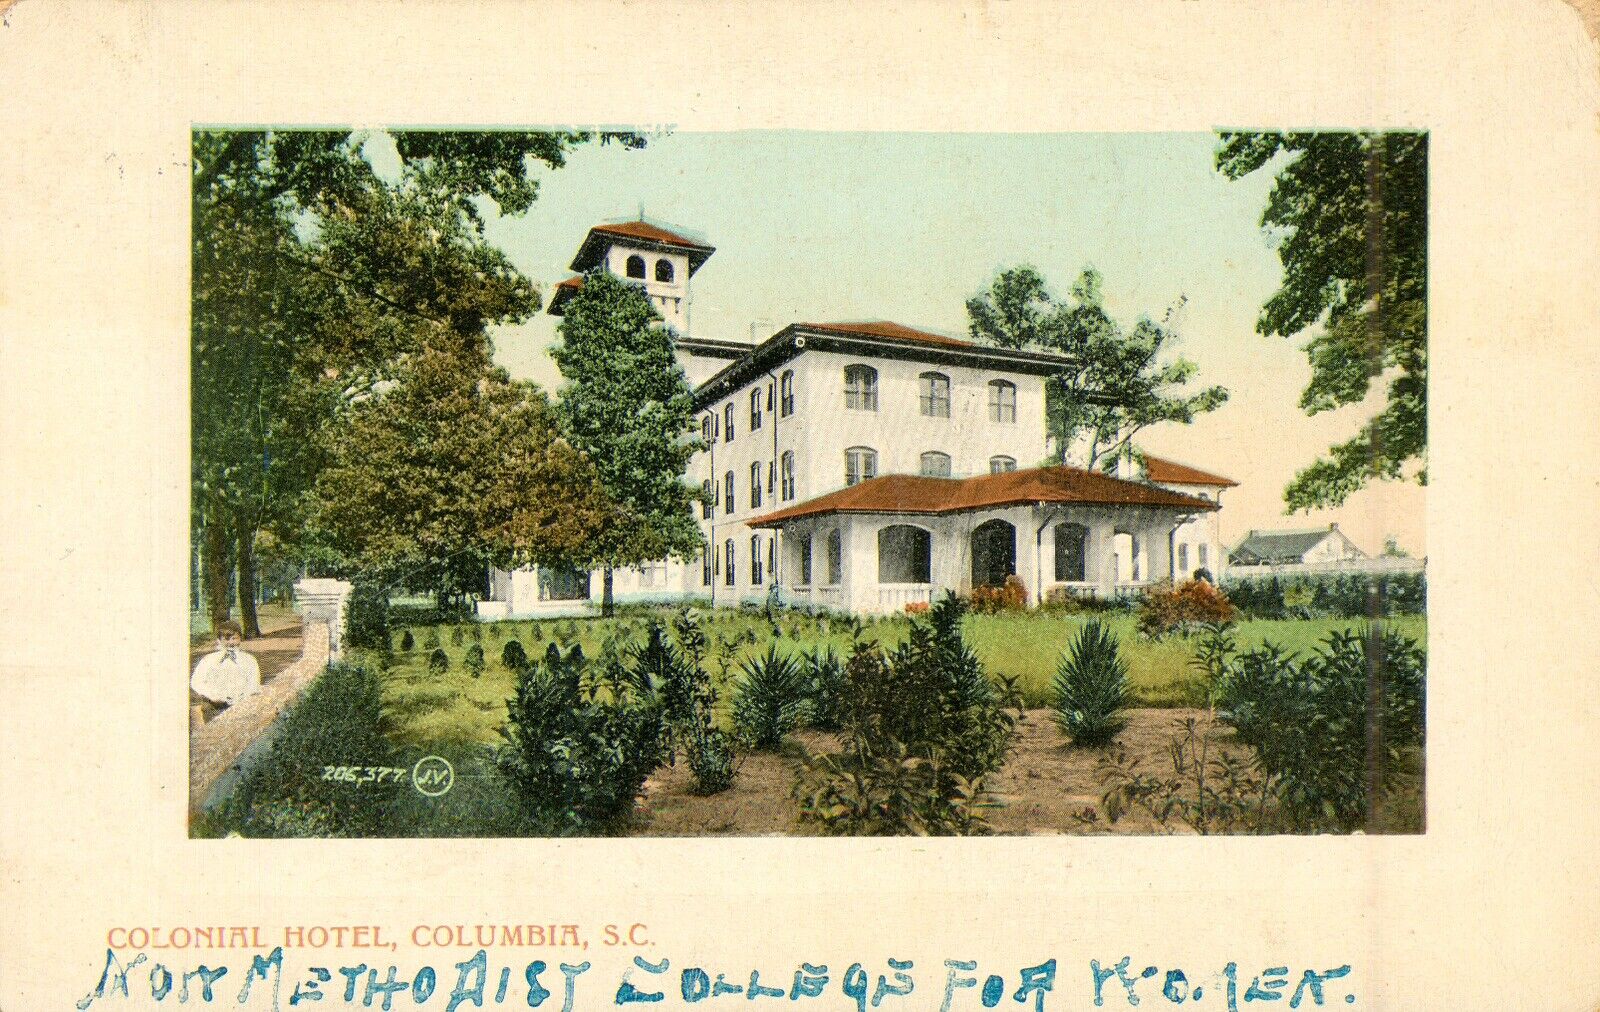 COLONIAL HOTEL, Columbia, S.C. 1910 Antique POSTCARD sent from Women’s College